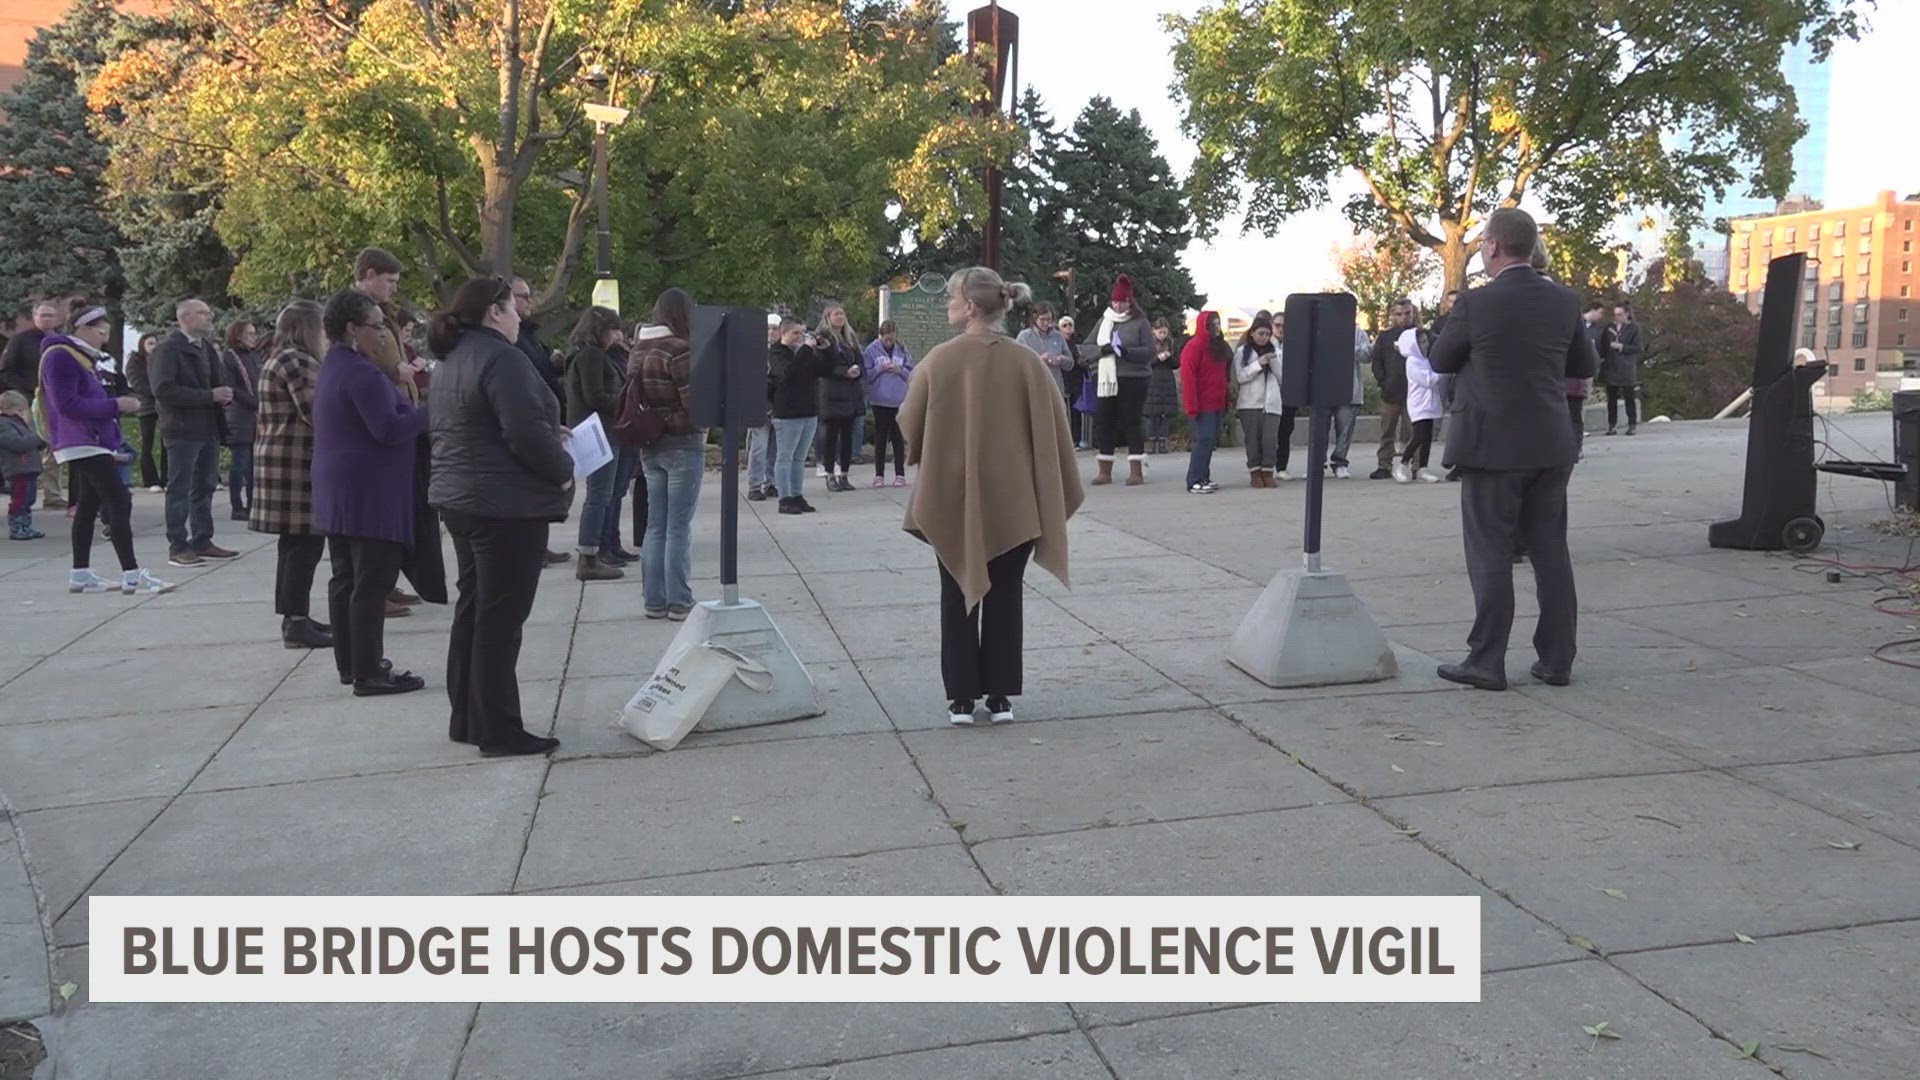 October is Domestic Violence Awareness Month and every year a vigil is held downtown to remember victims and support survivors.